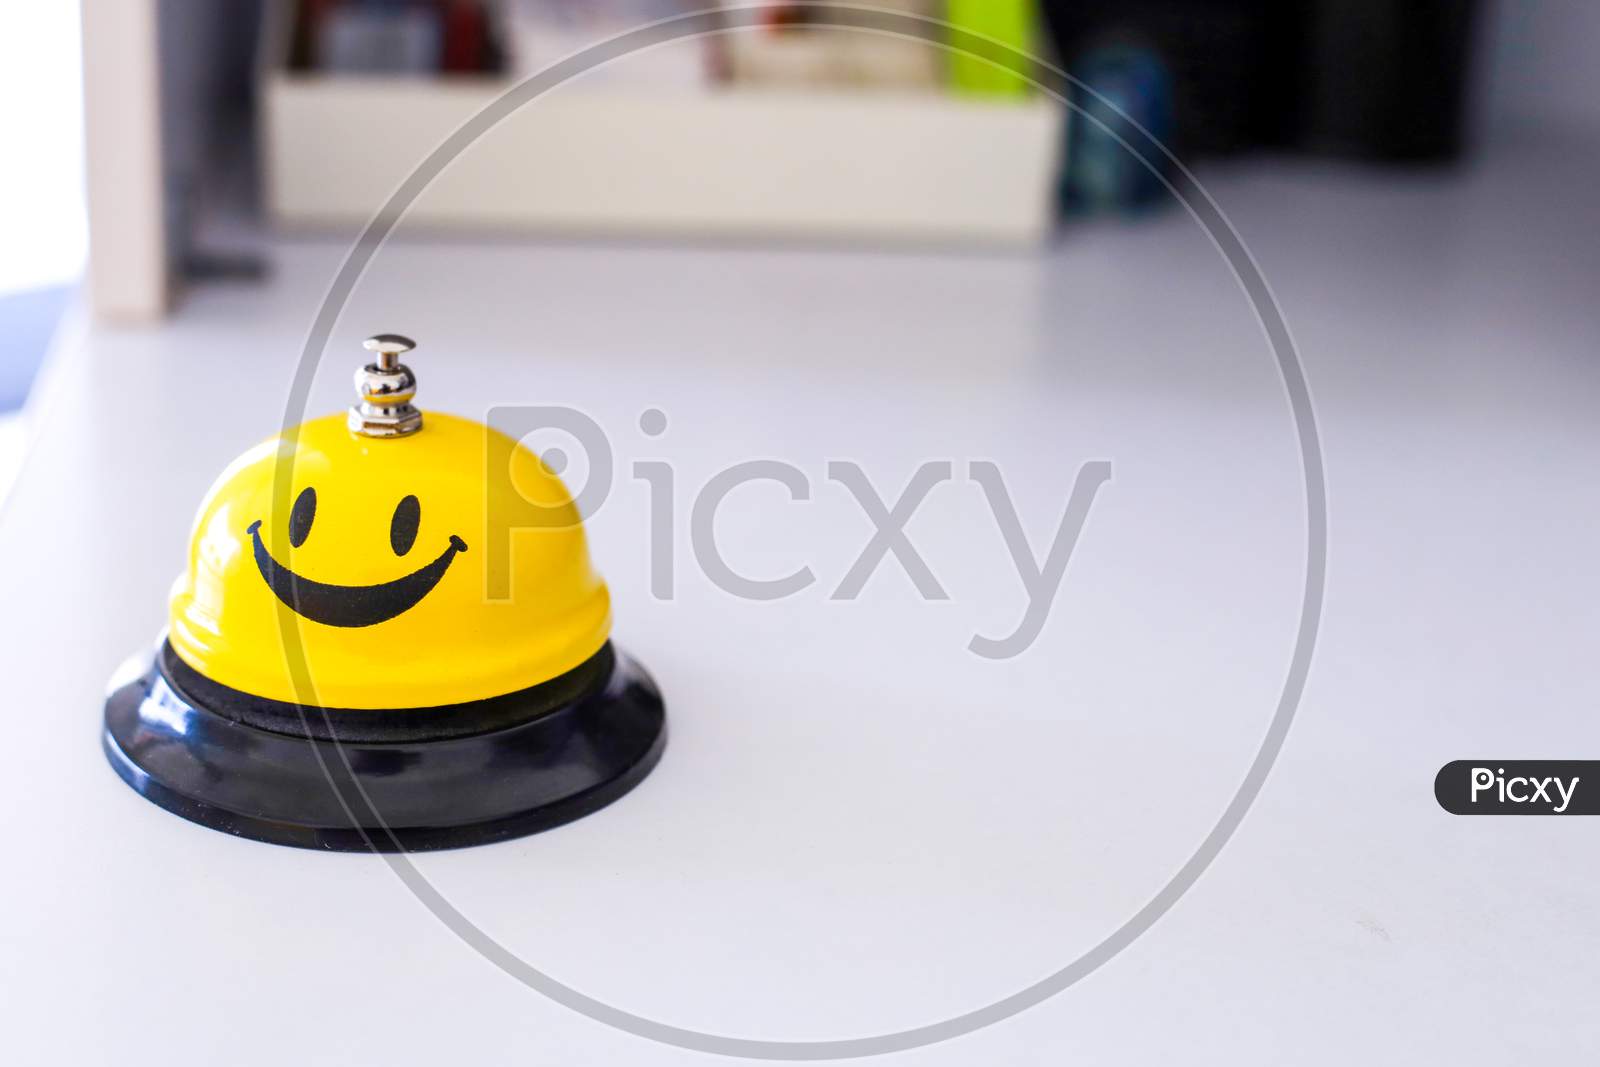 Creative Yellow Smiling Table Bell In Multiple Angle